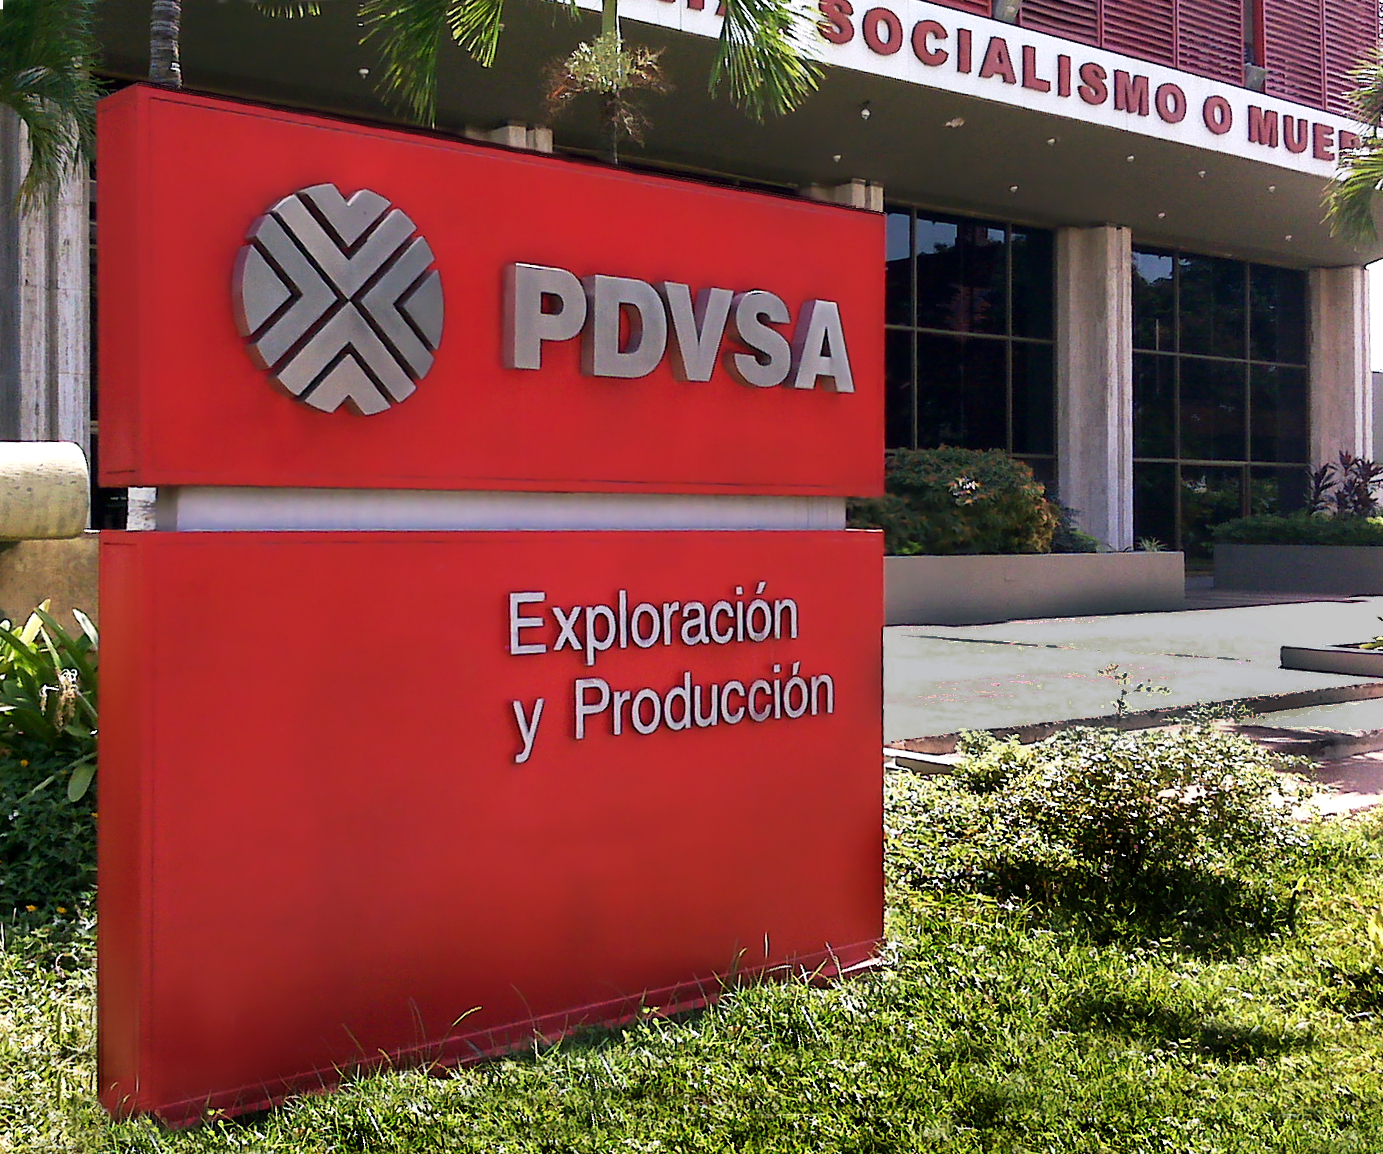 PDVSA production has been financing the socialist project for more than a decade.